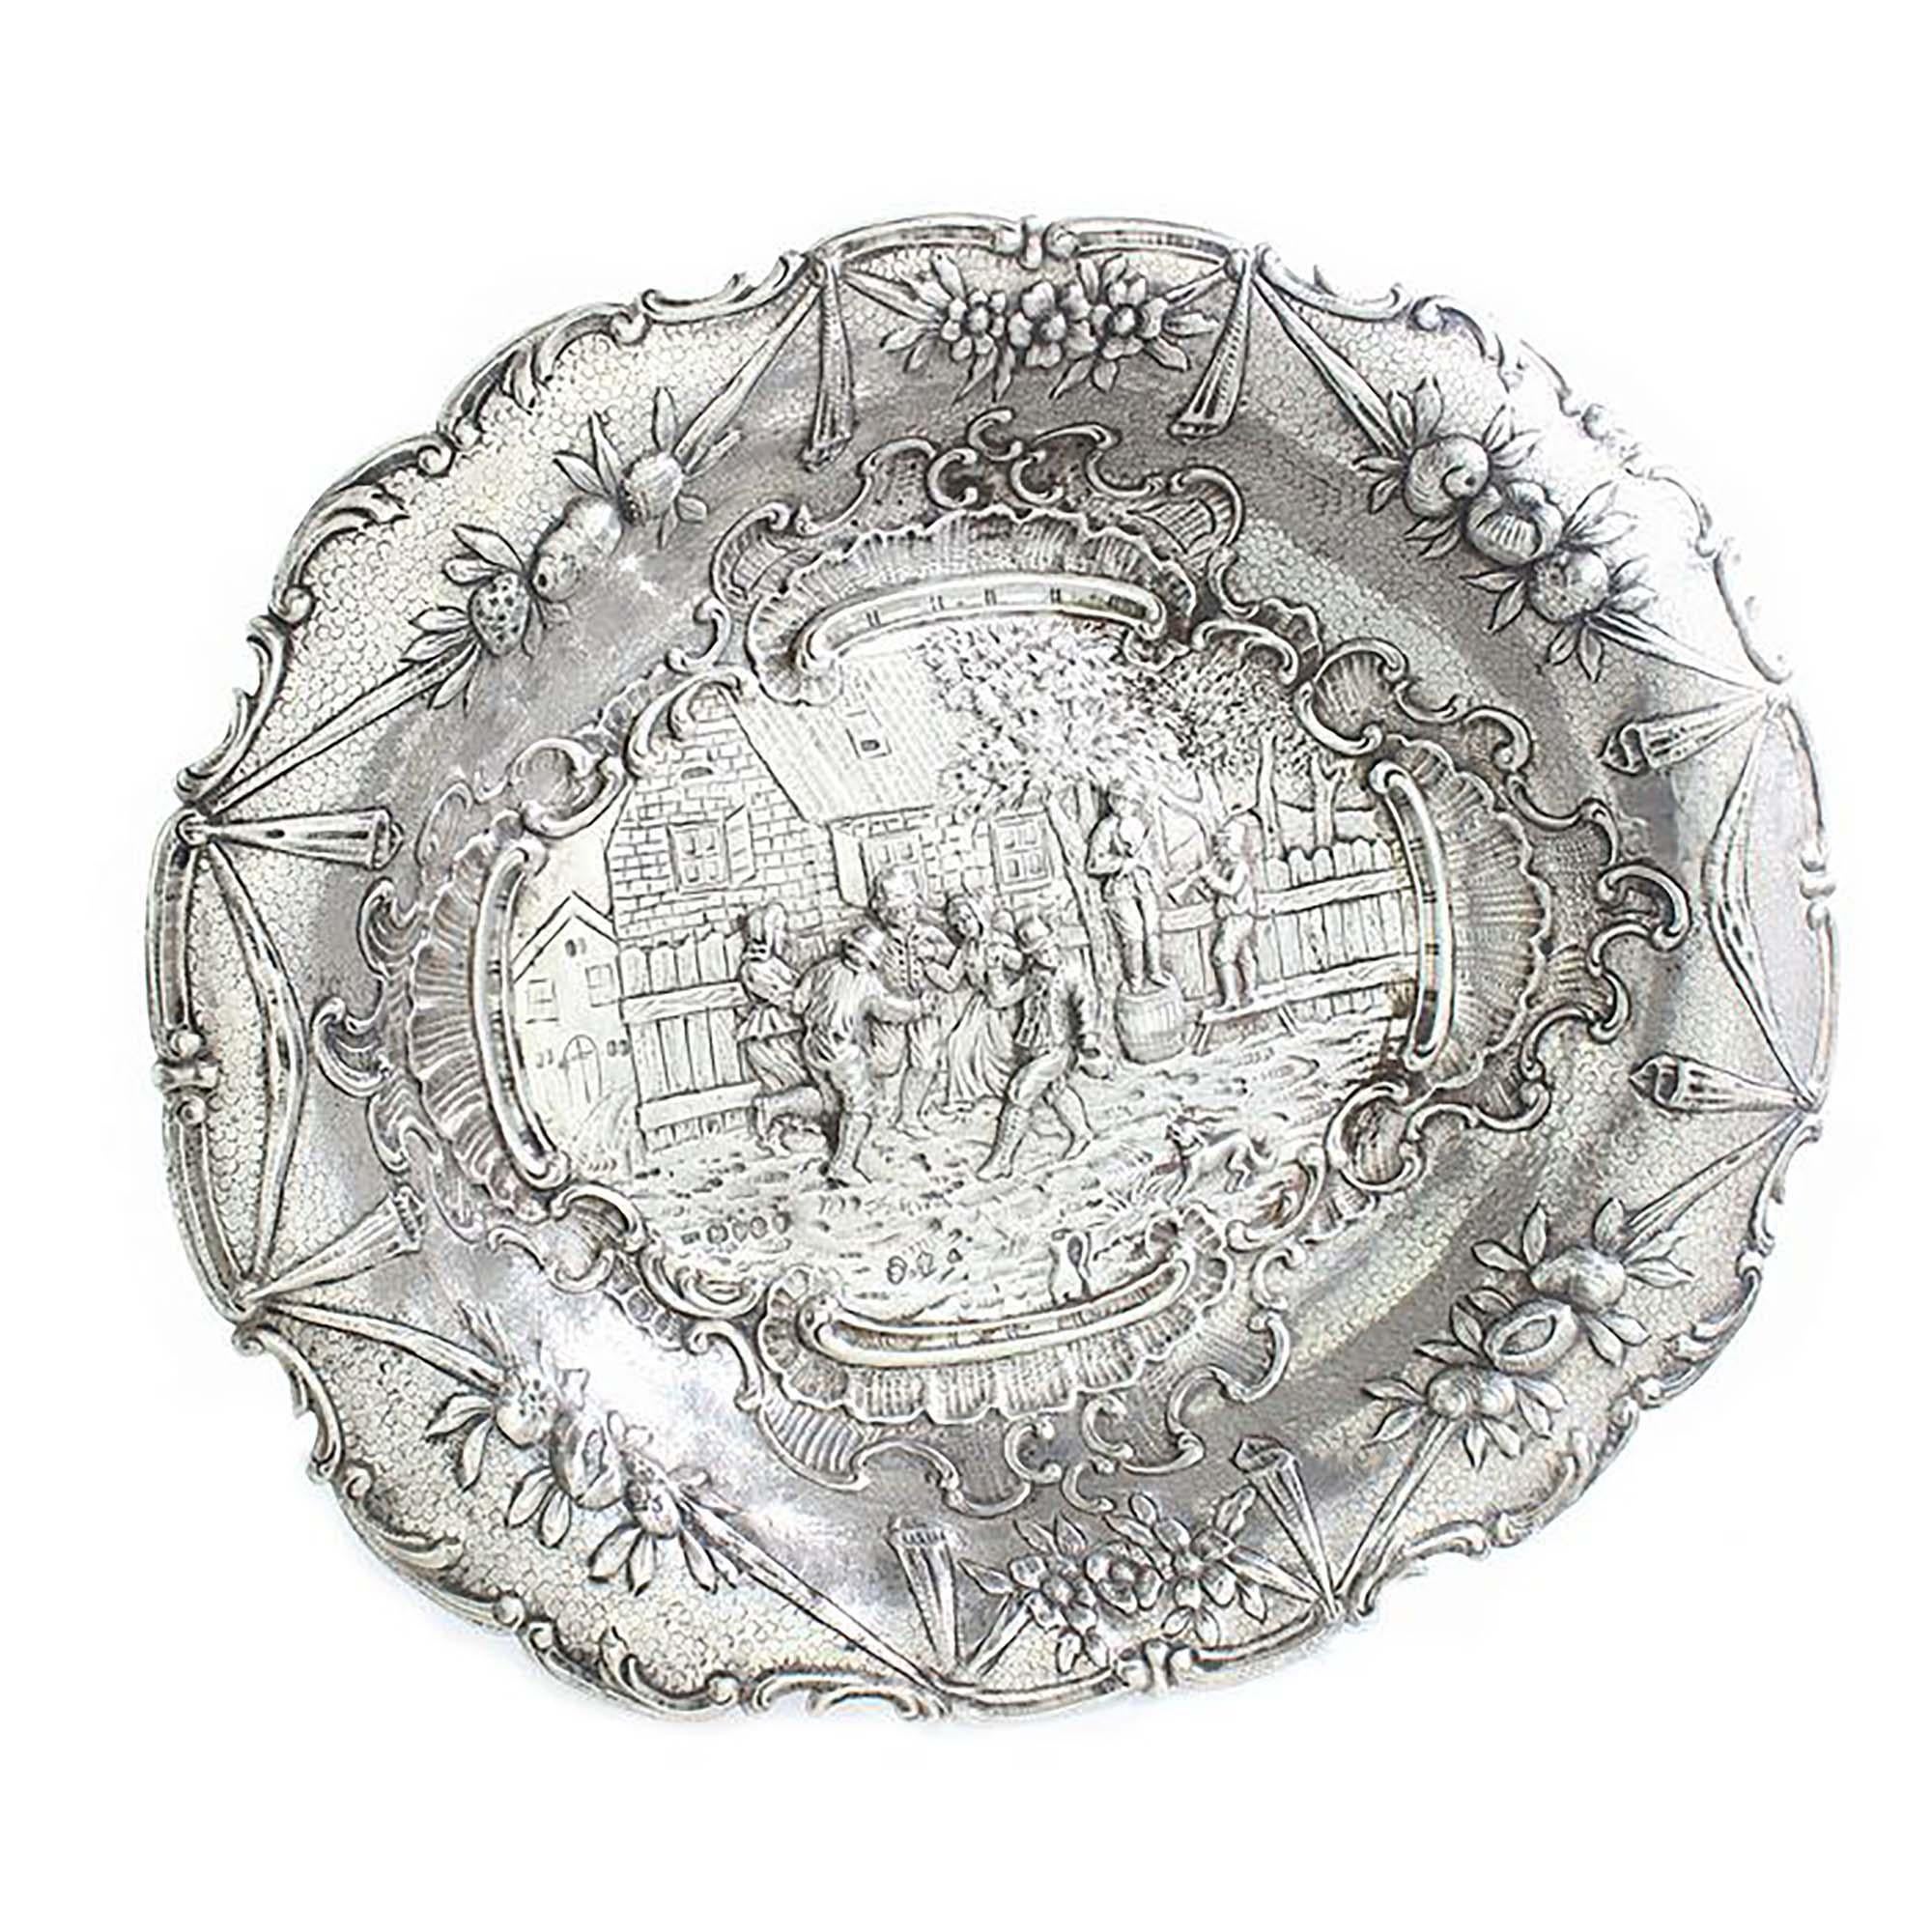 Antique German Hanau silver dish with David Teniers style engravings

Made in Germany, Hanau, Circa 1850's
Imported to London 1893
Importer: Thomas Glaser
Fully hallmarked.

Dimensions:
Size: 18 x 22.5 x 4 cm
Weight: 455 grams

Condition: Minor wear